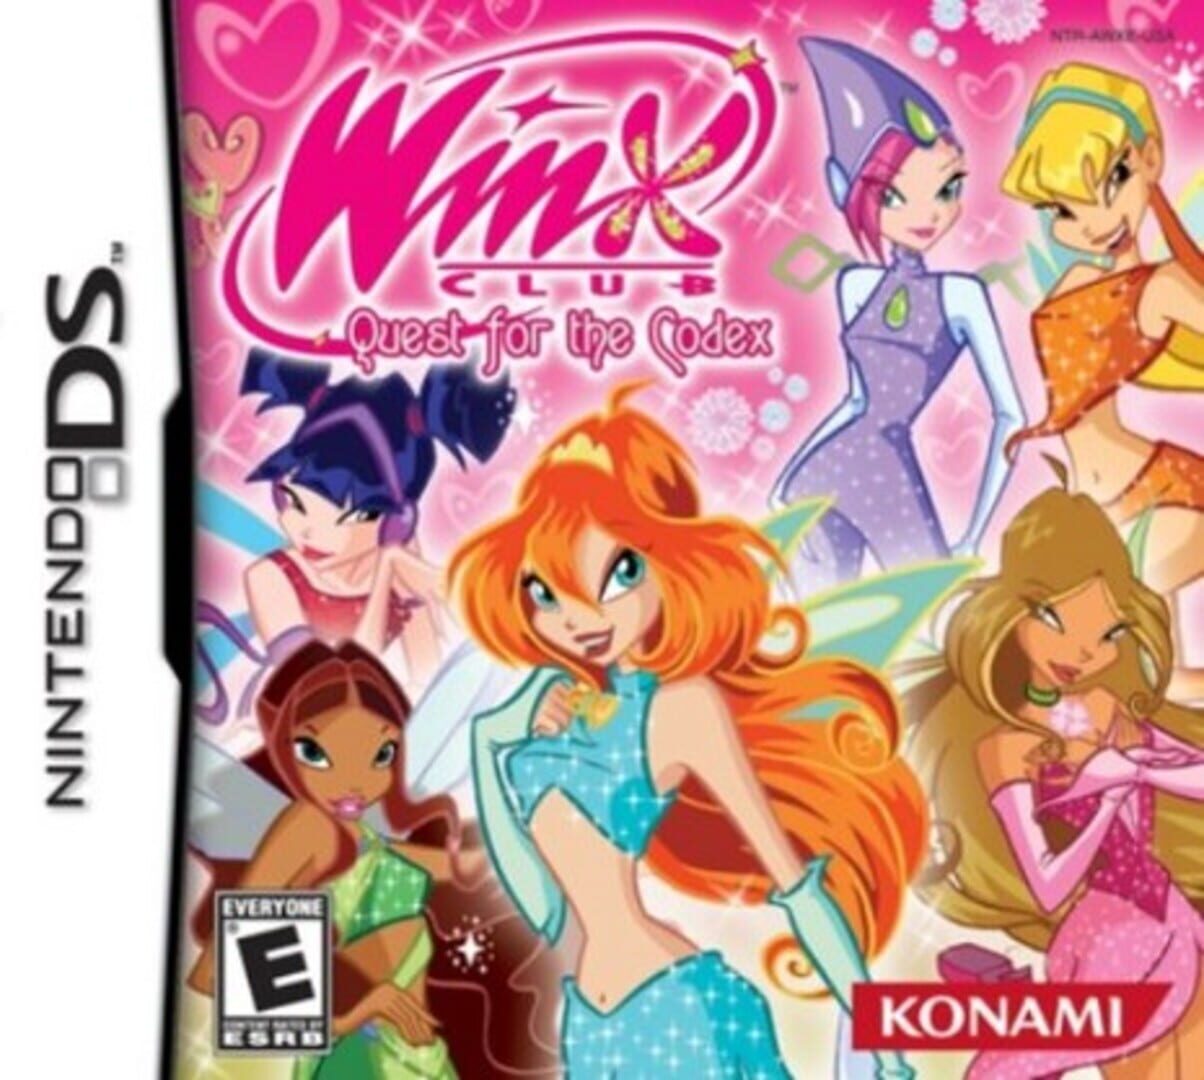 WinX Club: Quest for the Codex (2006)